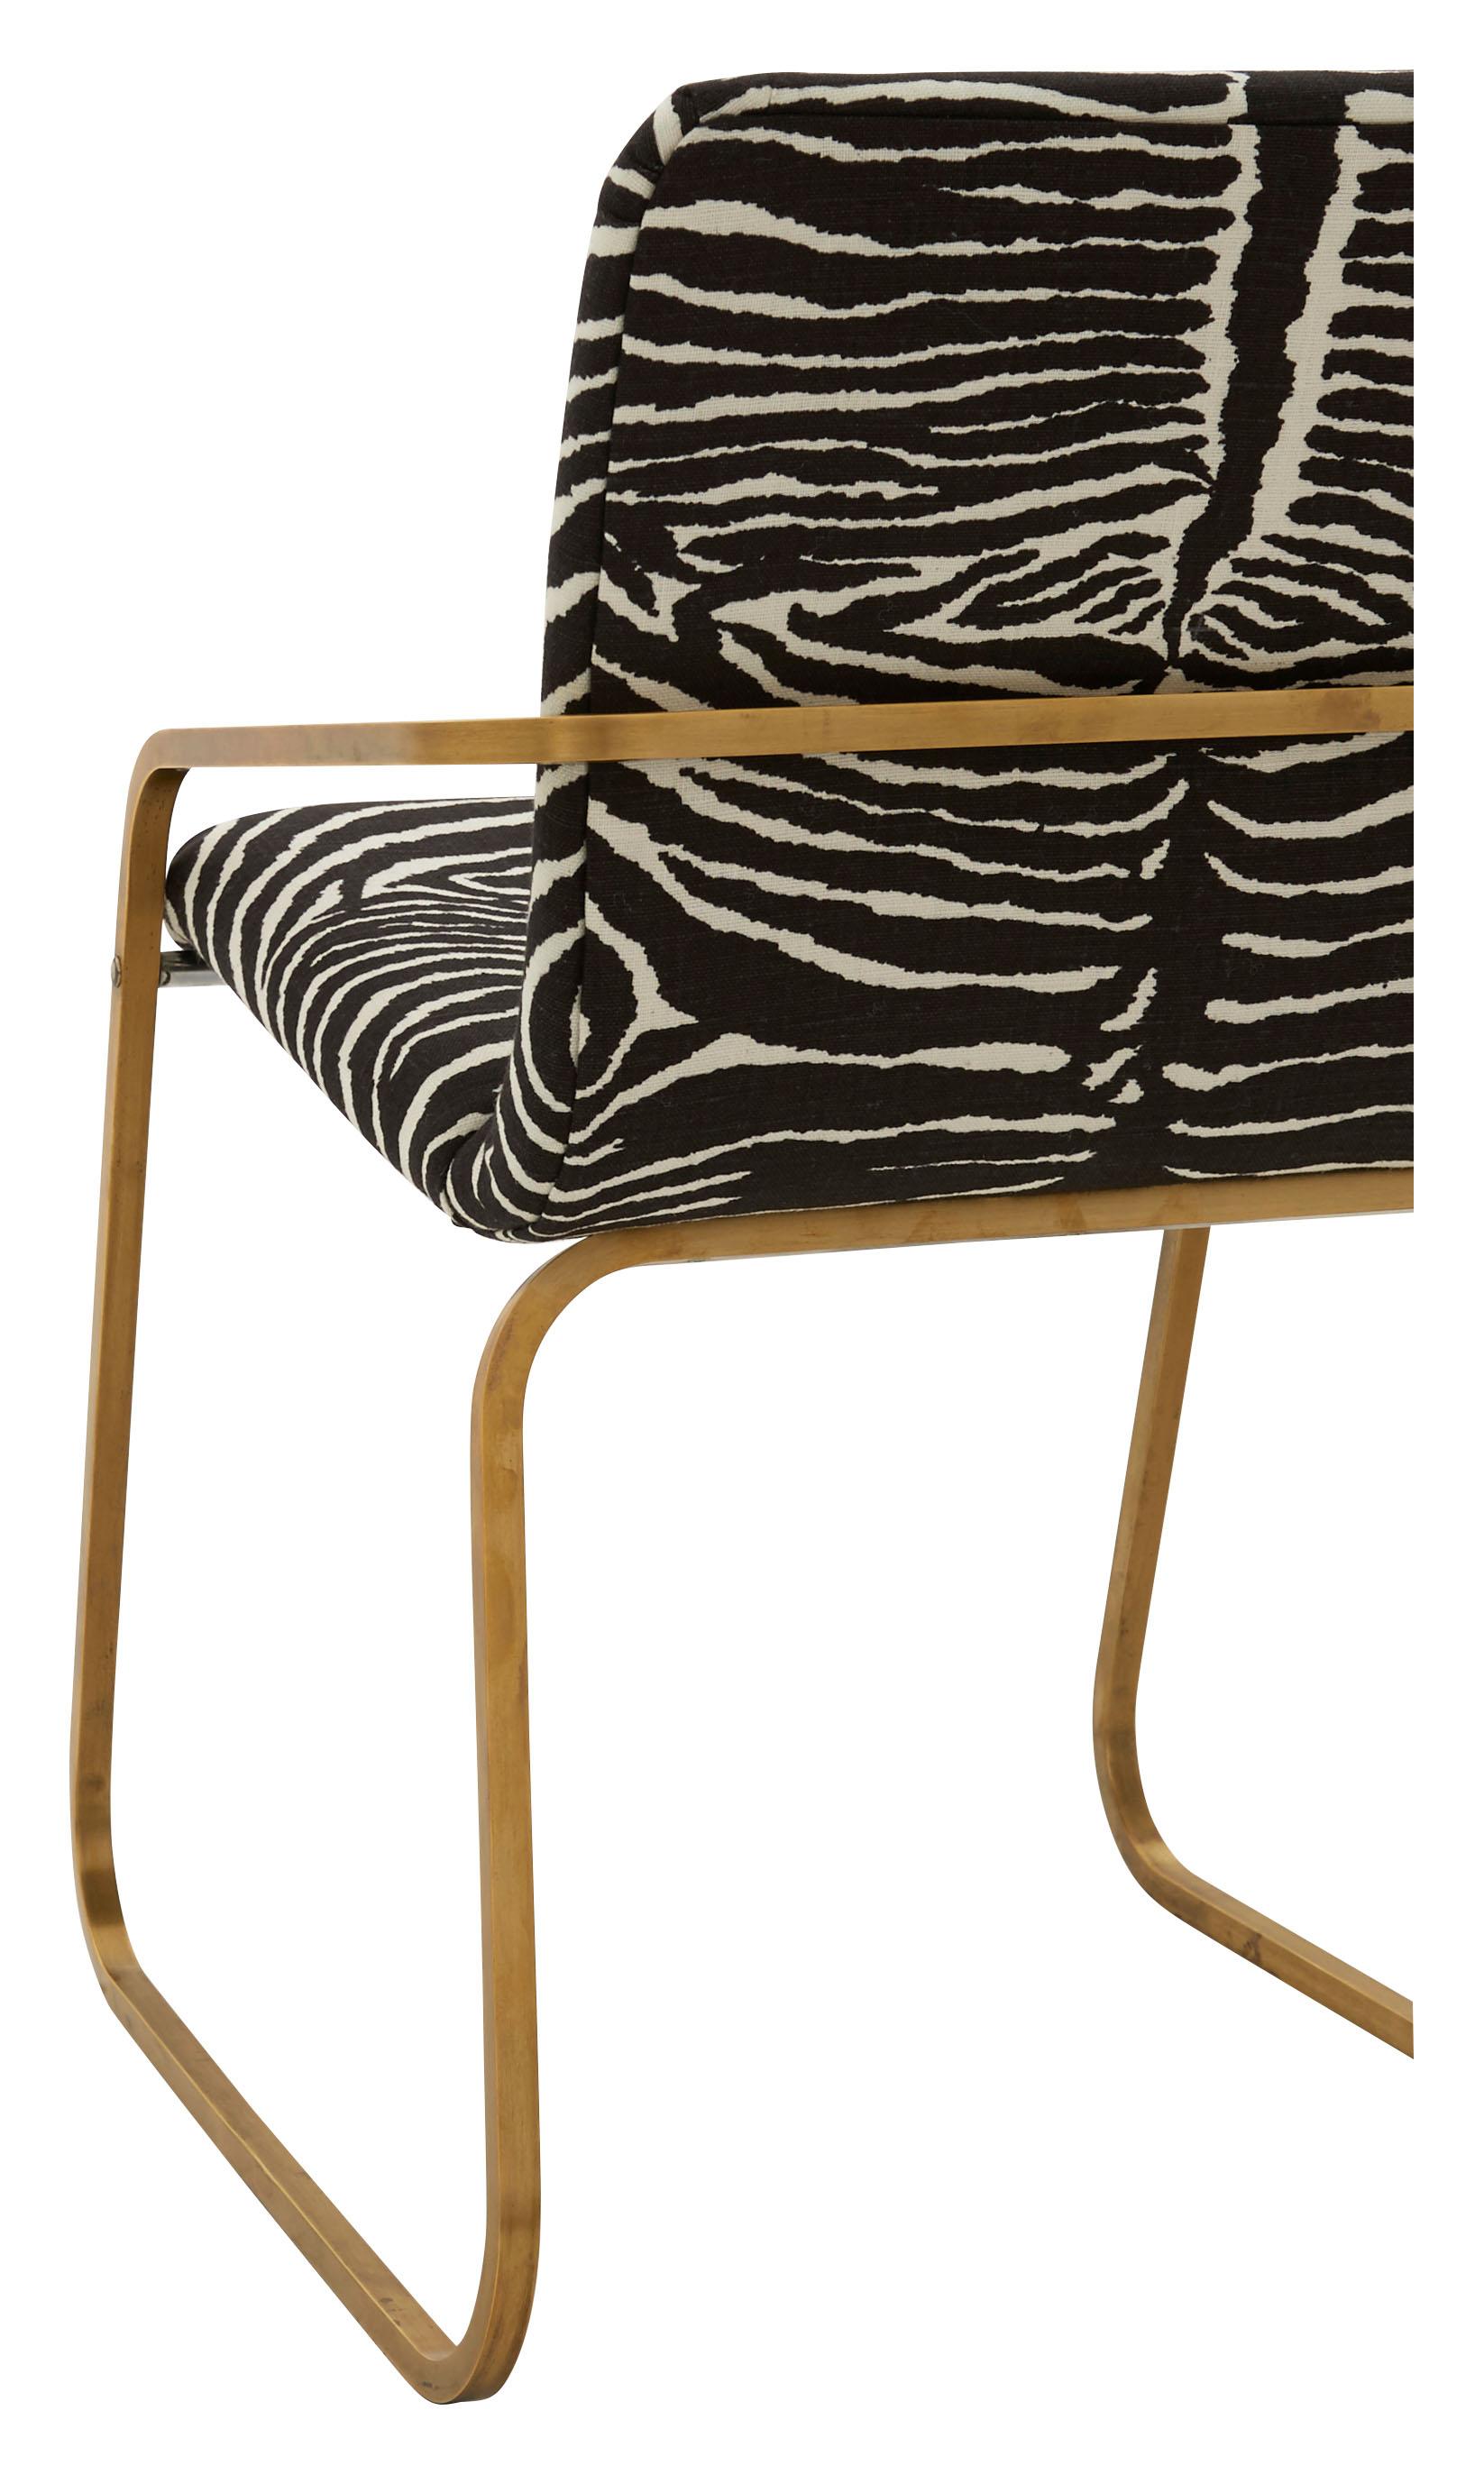 French Midcentury Brass Willy Rizzo Dining Chair Upholstered in Zebra Print Linen